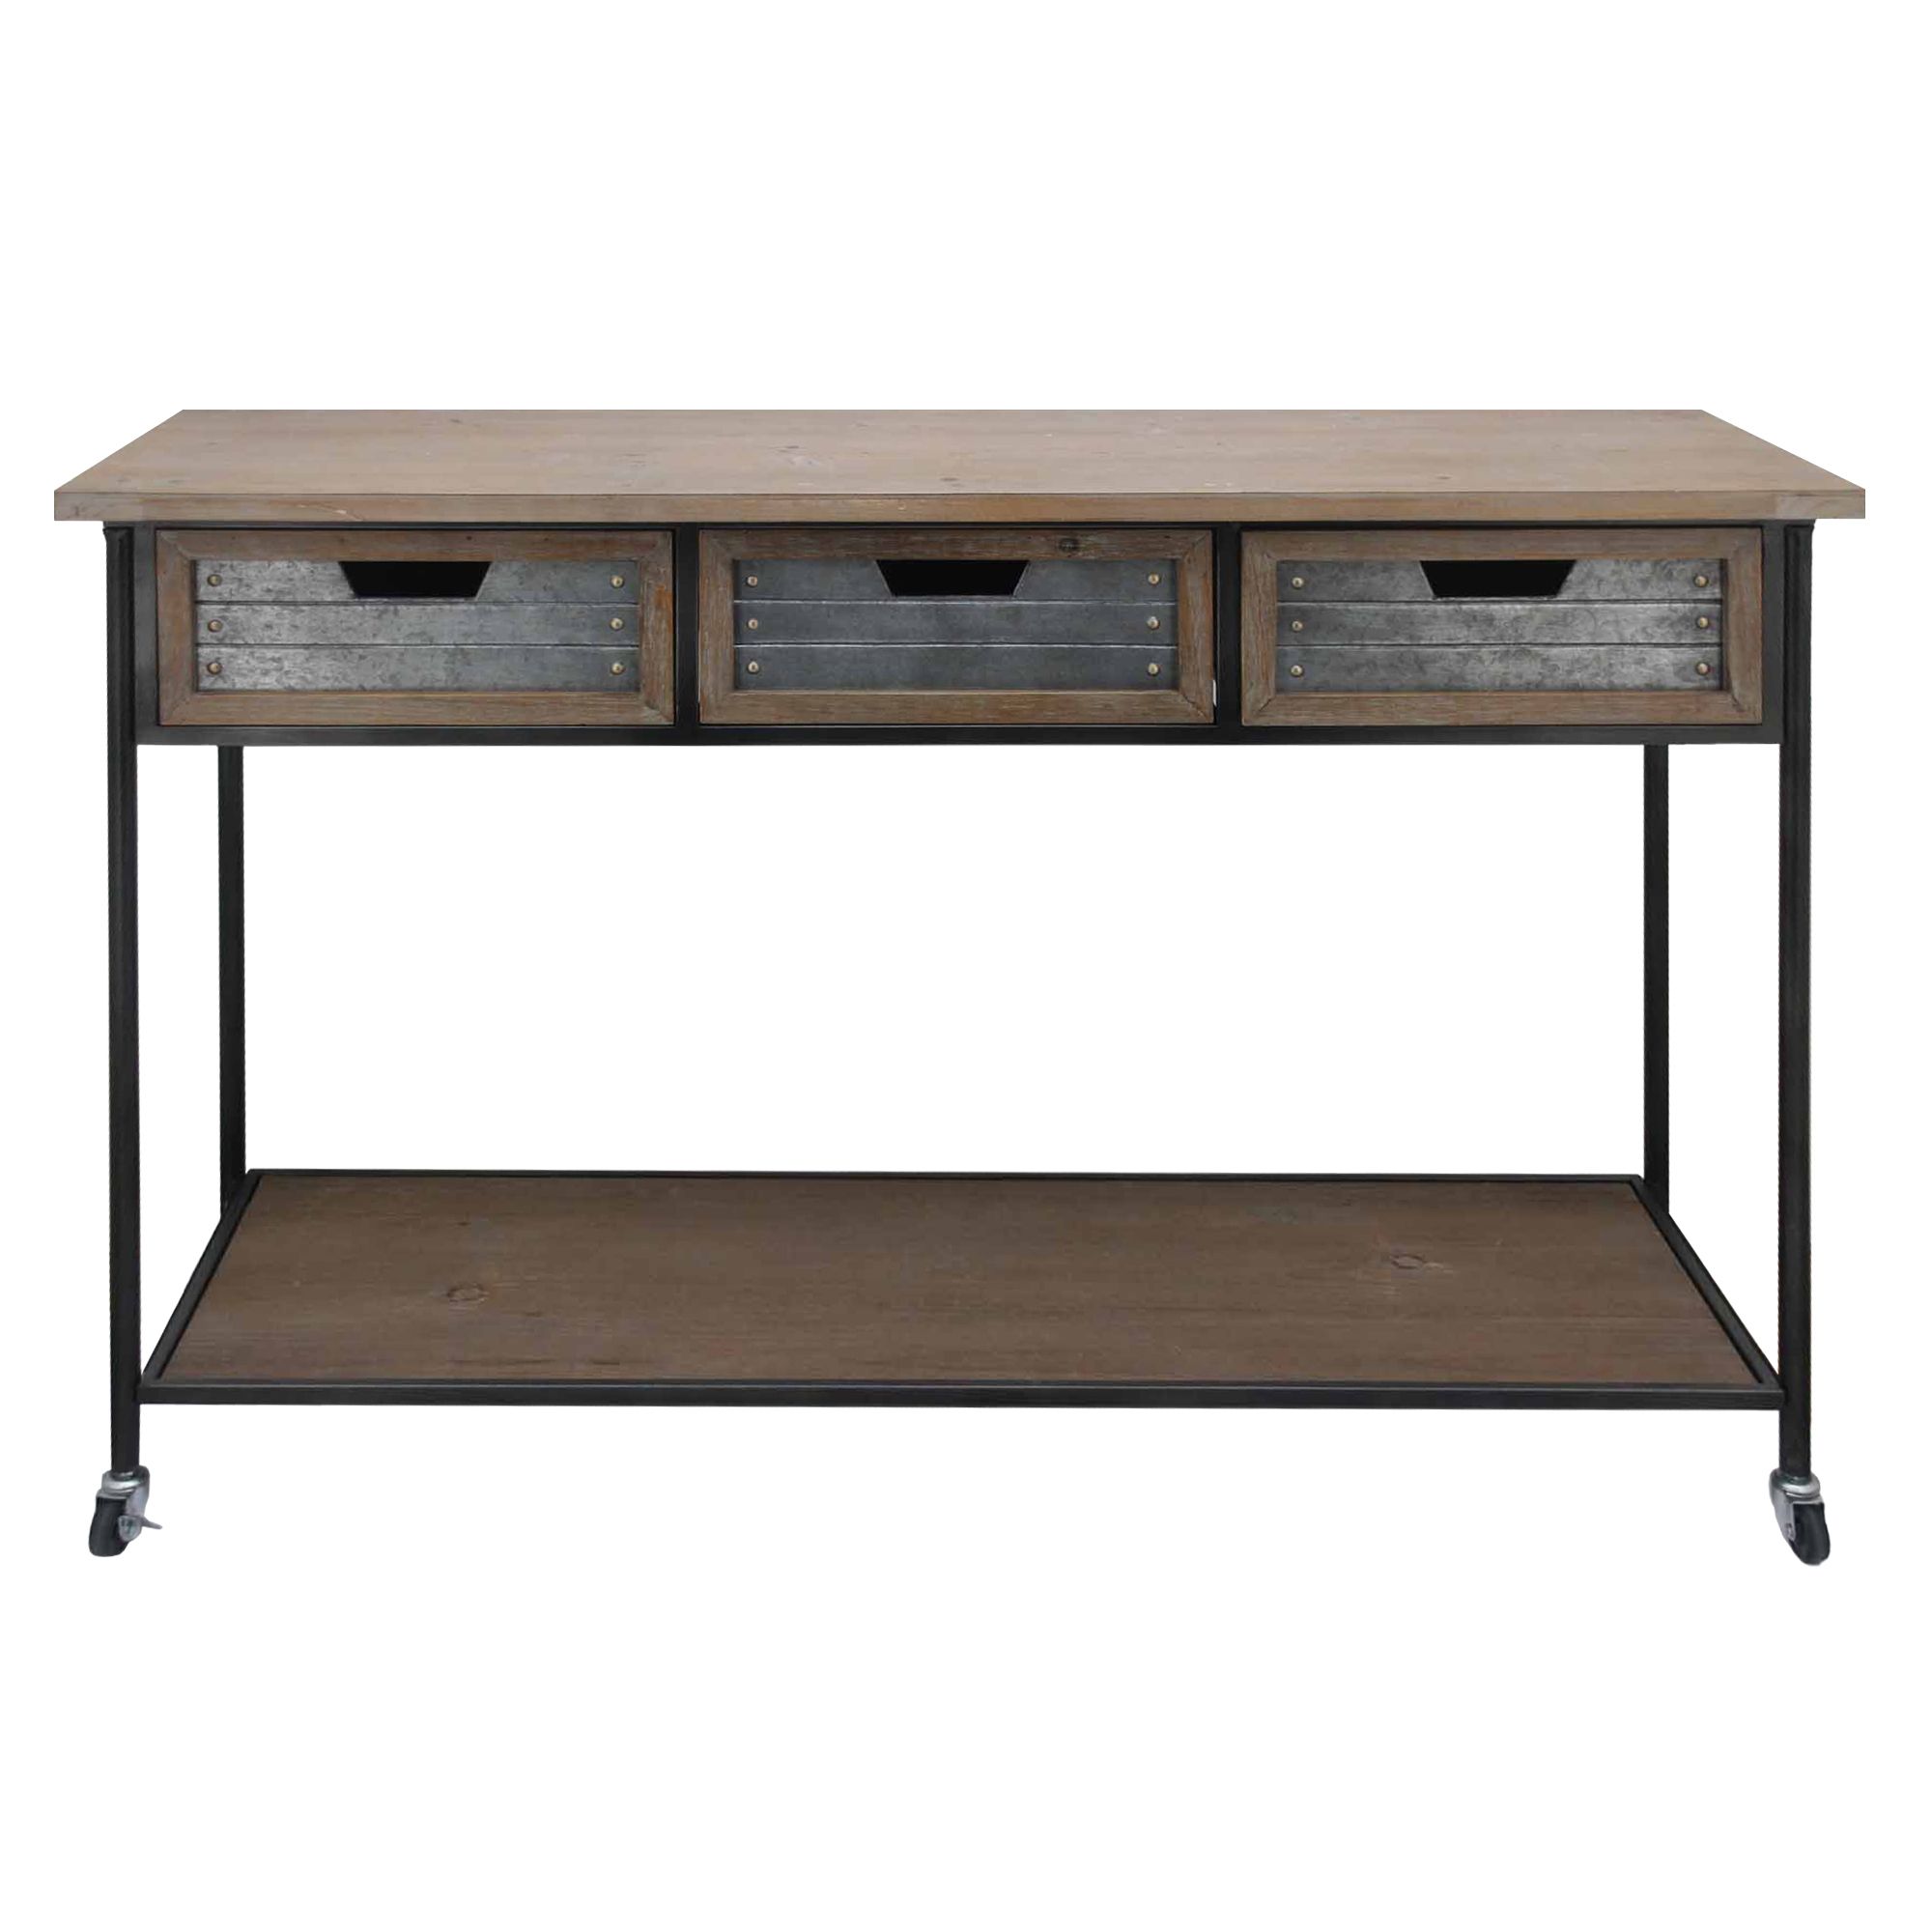 Caster Supported 3 Drawer Wood And Metal Console Table, Brown And Black Intended For Brown And Matte Black 3 Drawer Desks (View 15 of 15)